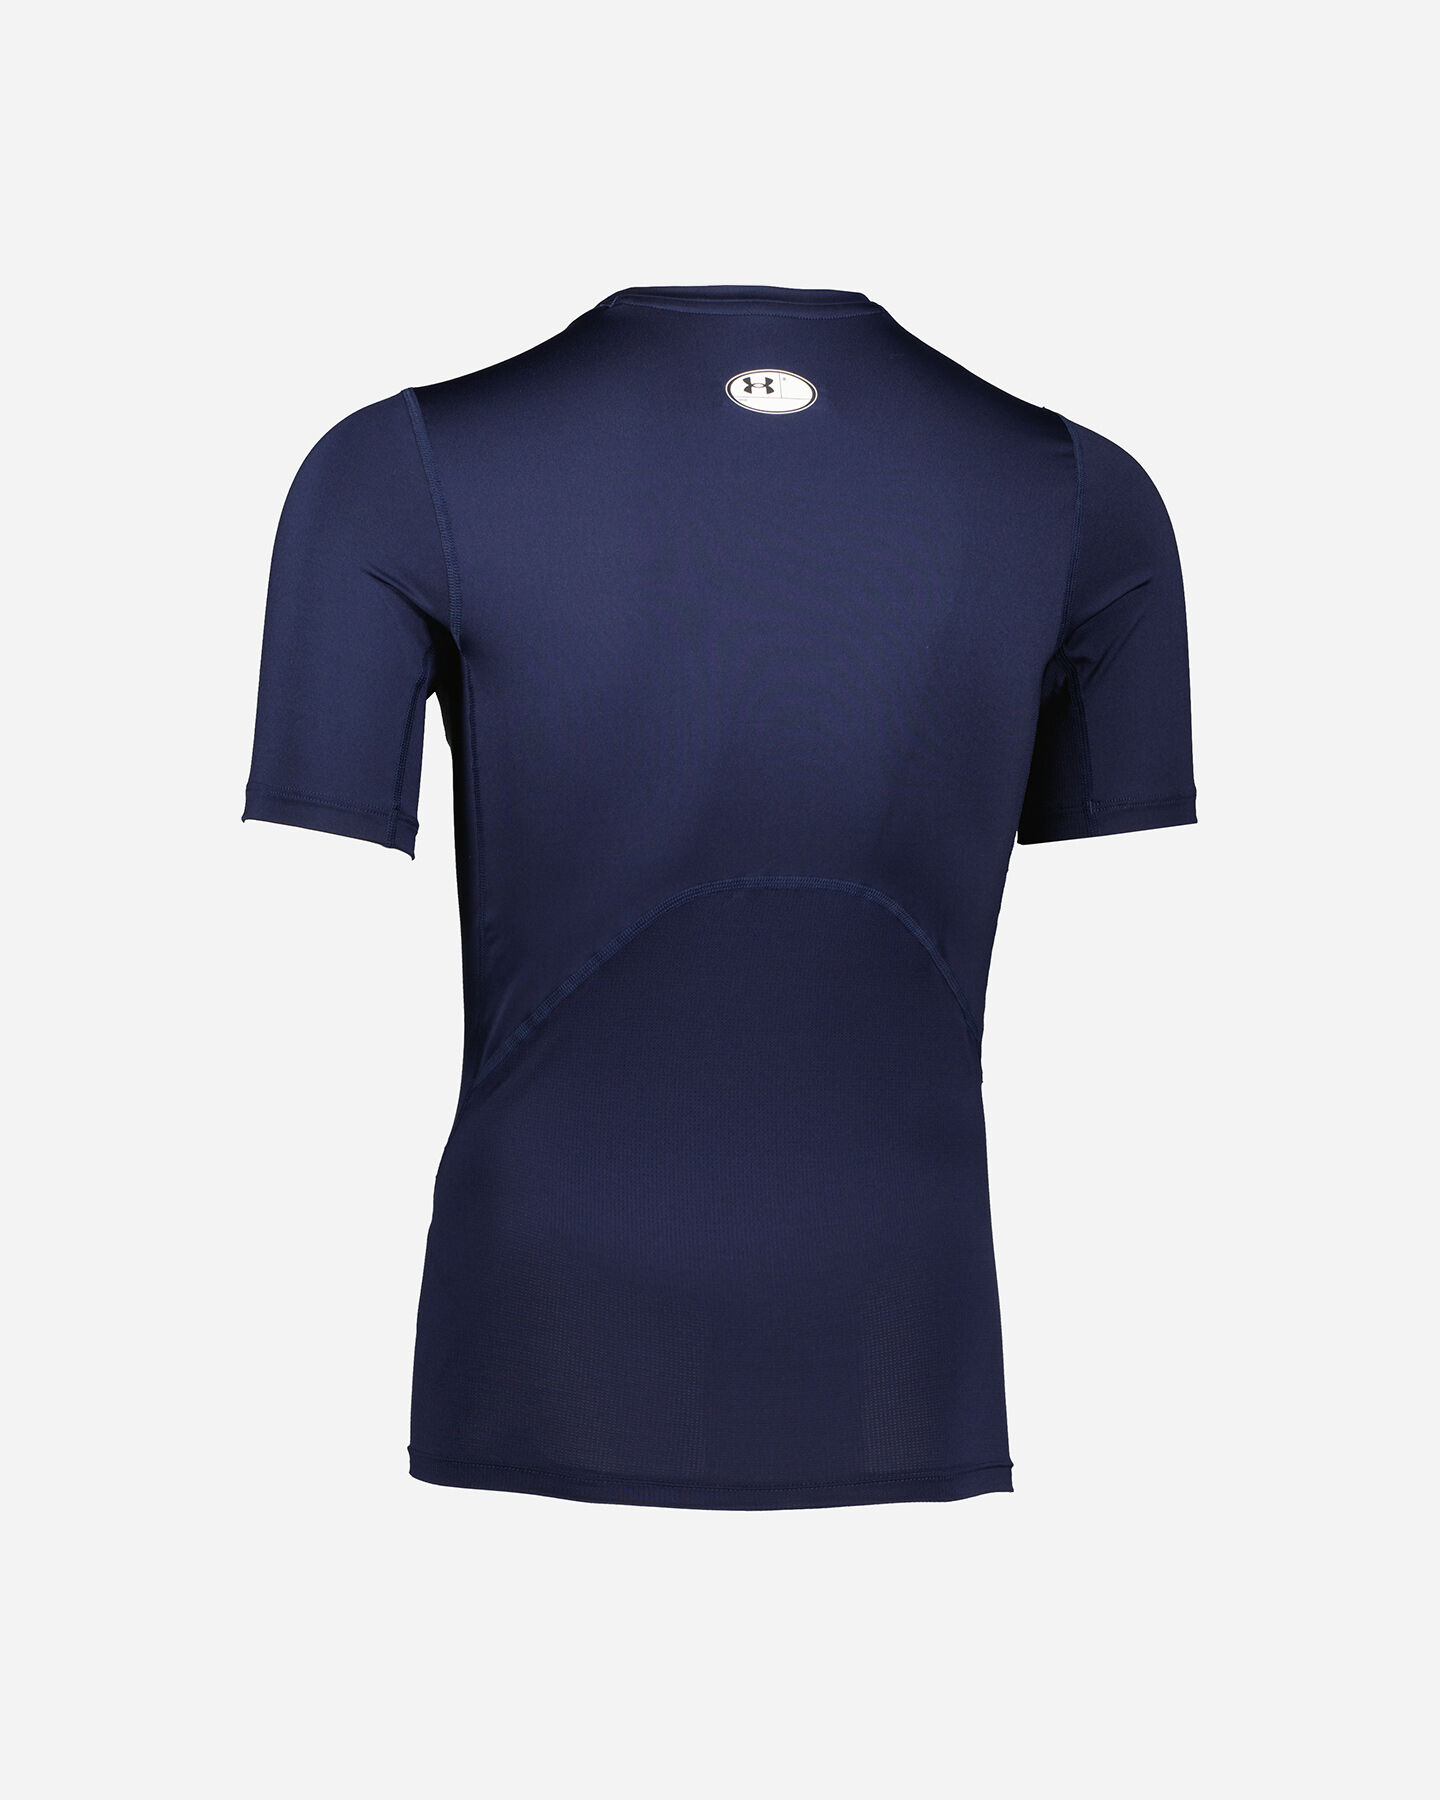  T-Shirt training UNDER ARMOUR HG COMPRESSION M S5287279 scatto 1